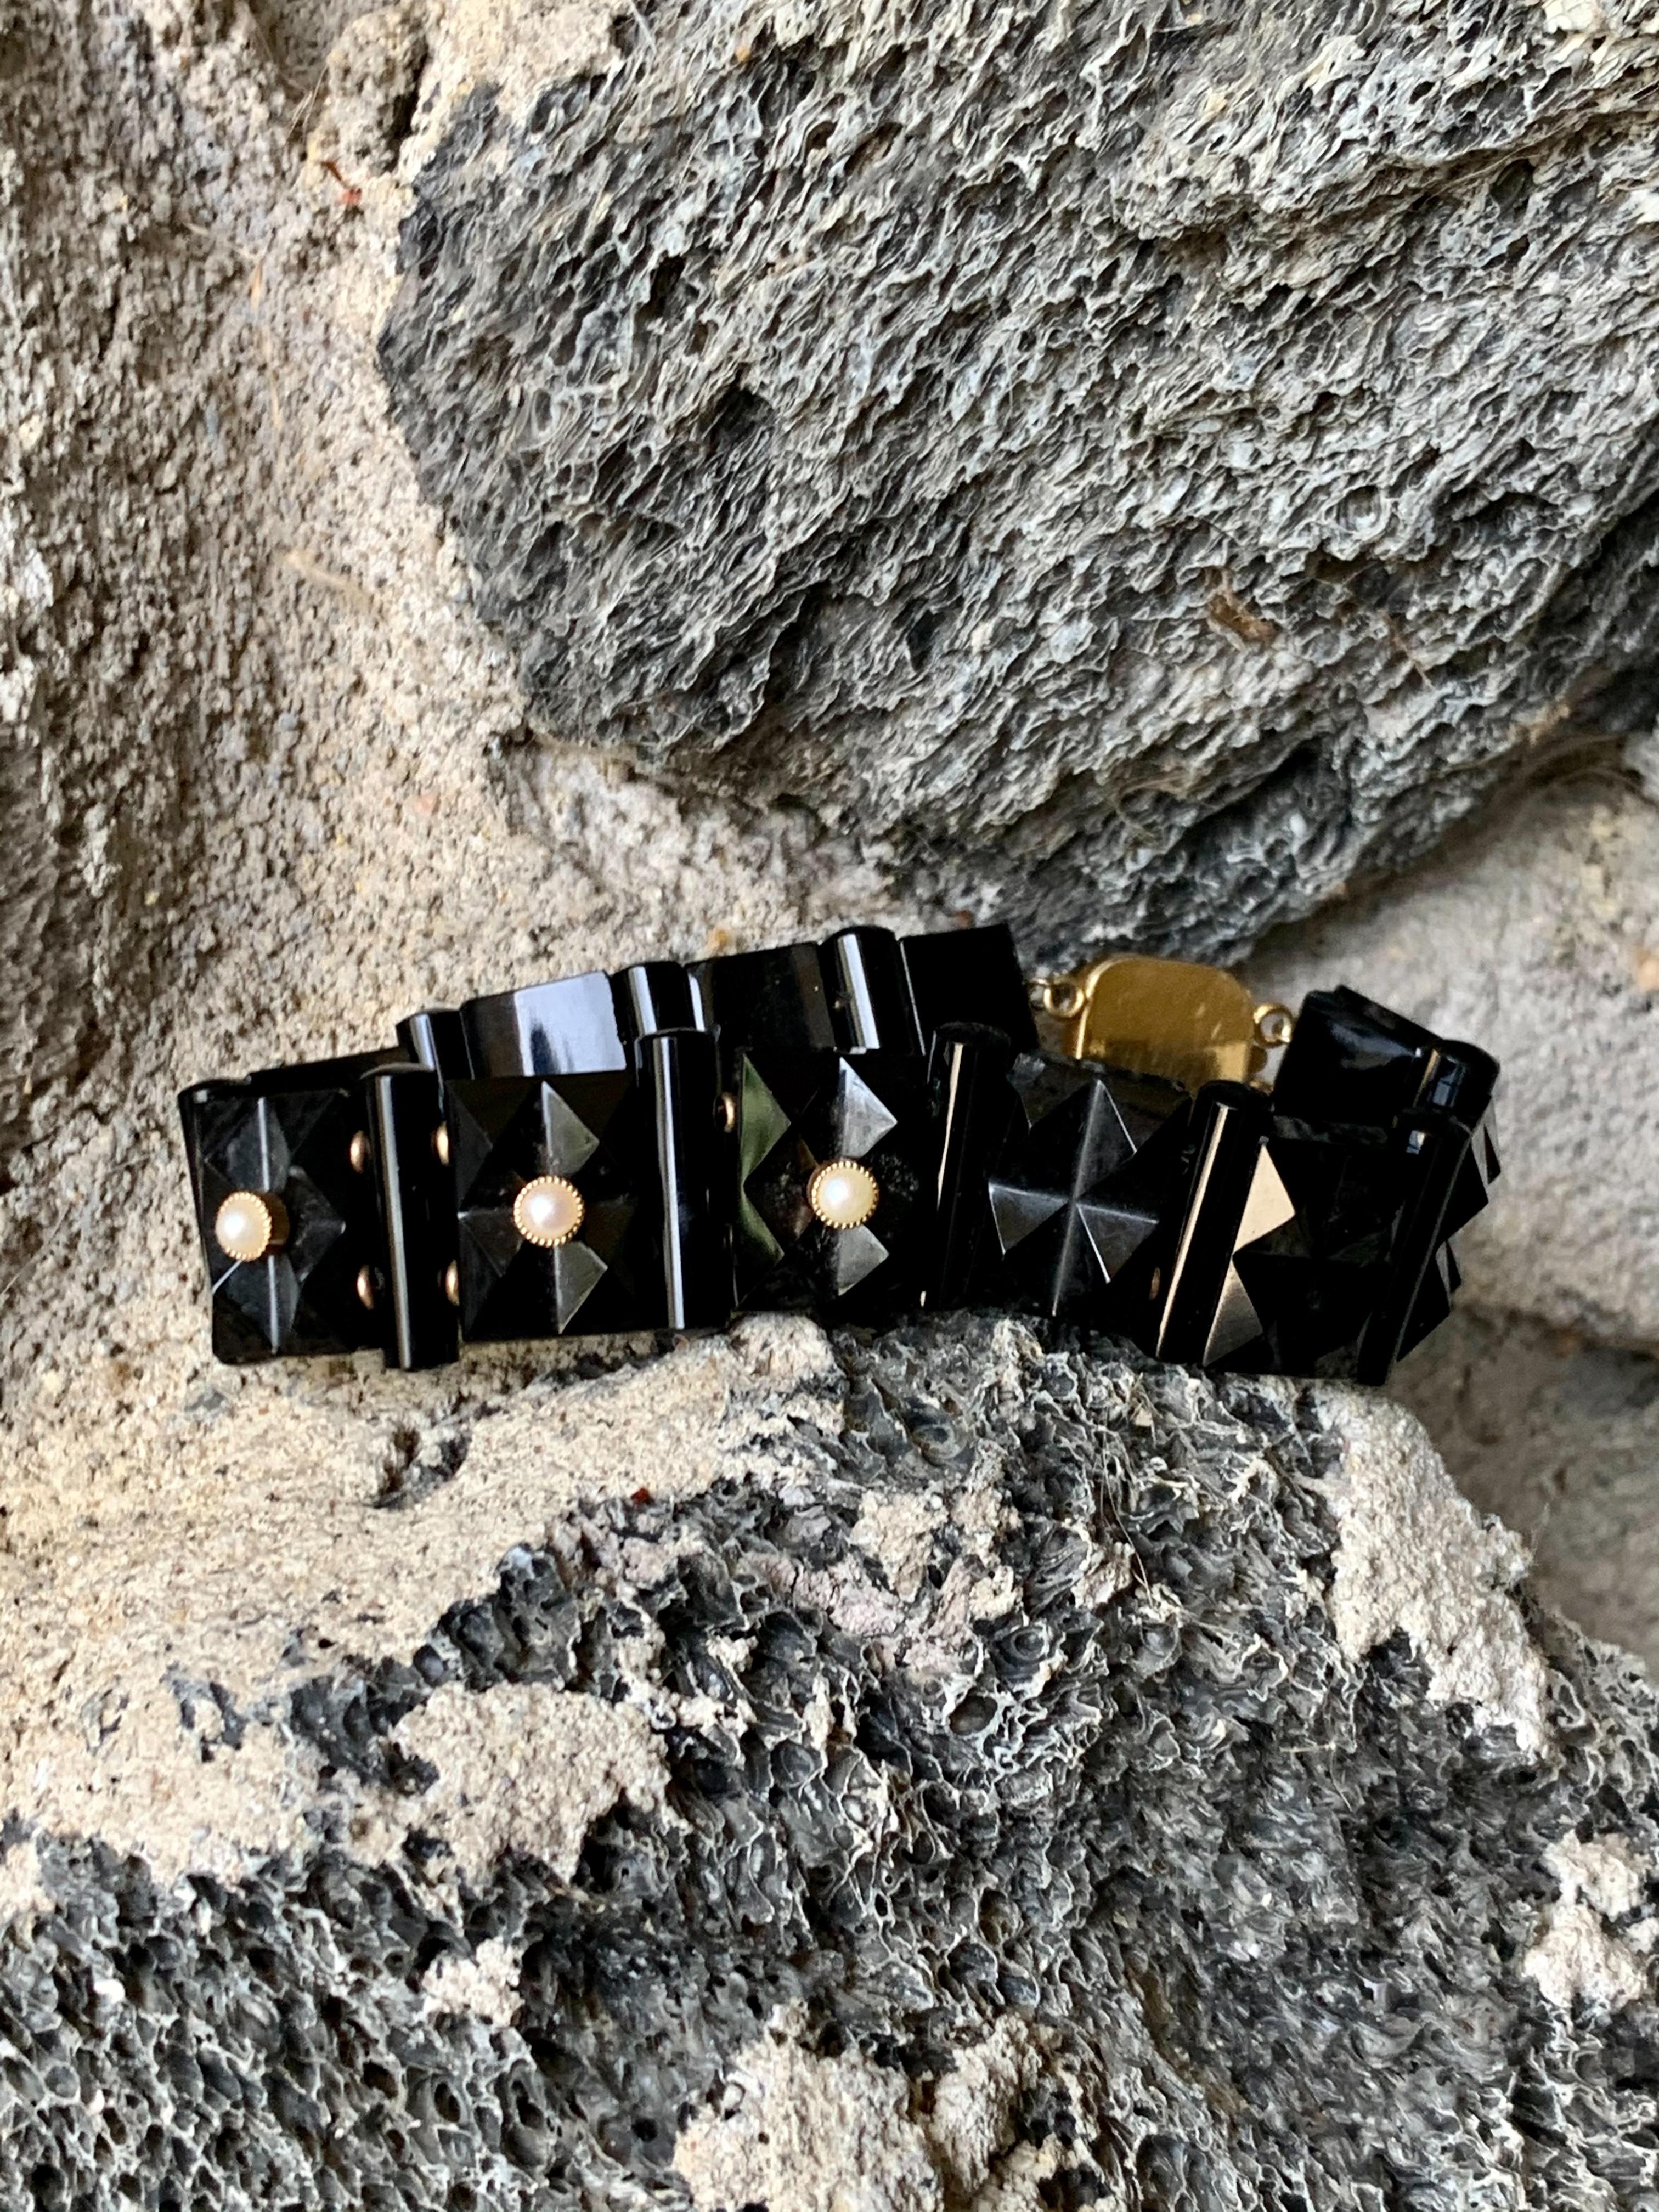 This stunning antique bracelet features eleven links of black Onyx with cylinder-shaped black Onyx spacers.  There are three pearls used to accent the bracelet.  They are each set in 14k yellow Gold.  Each Pearl is 3.5mm is size.

The clasp is